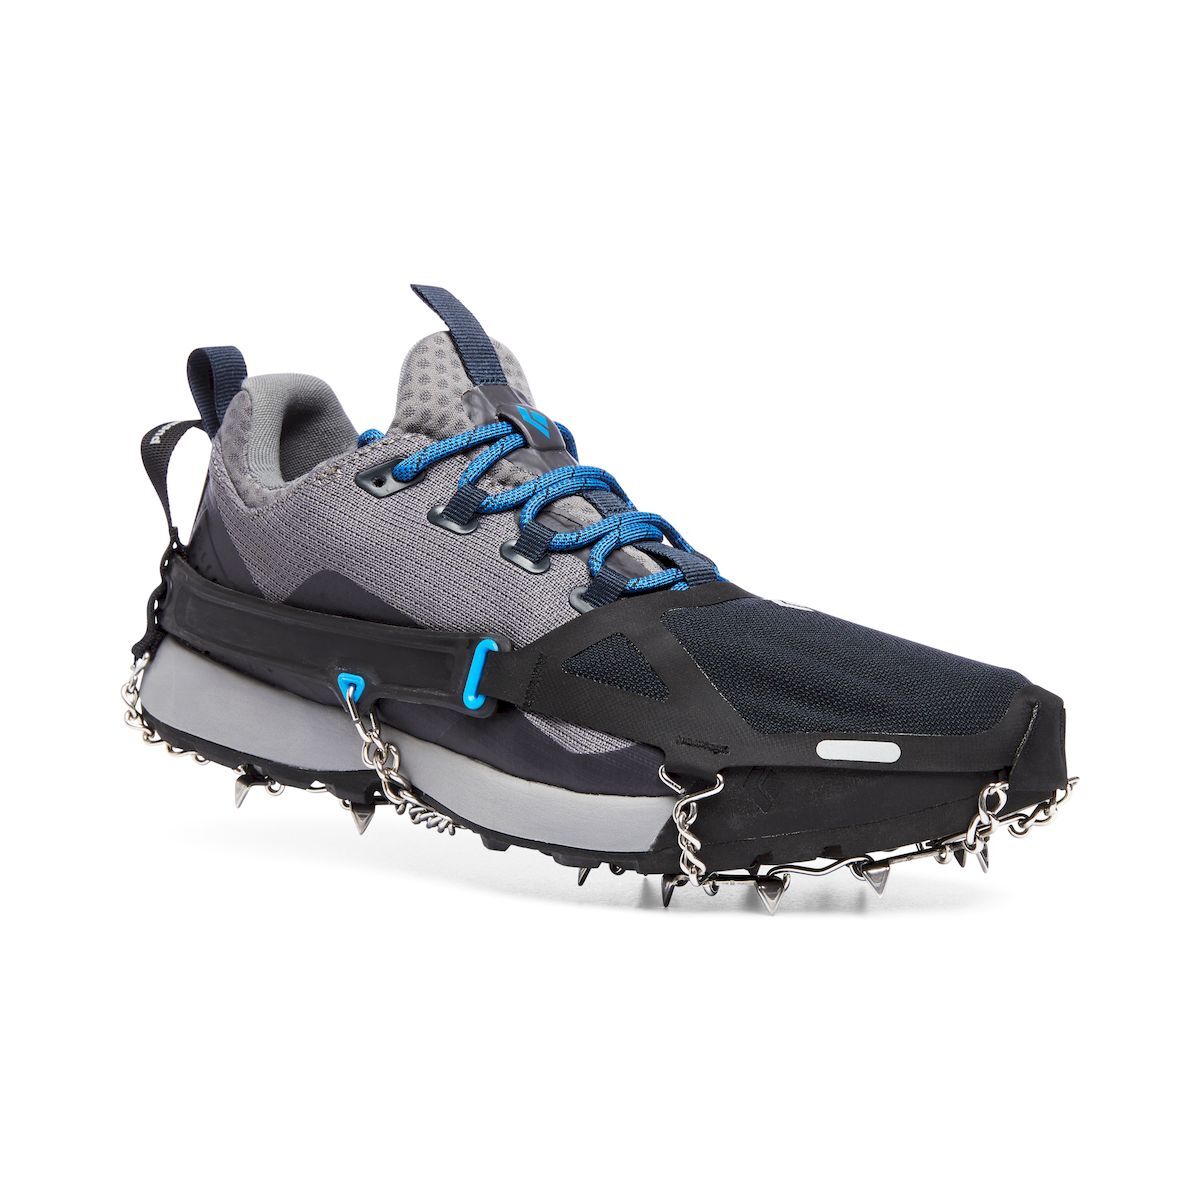 Black Diamond Distance Spike Traction Device - Crampons